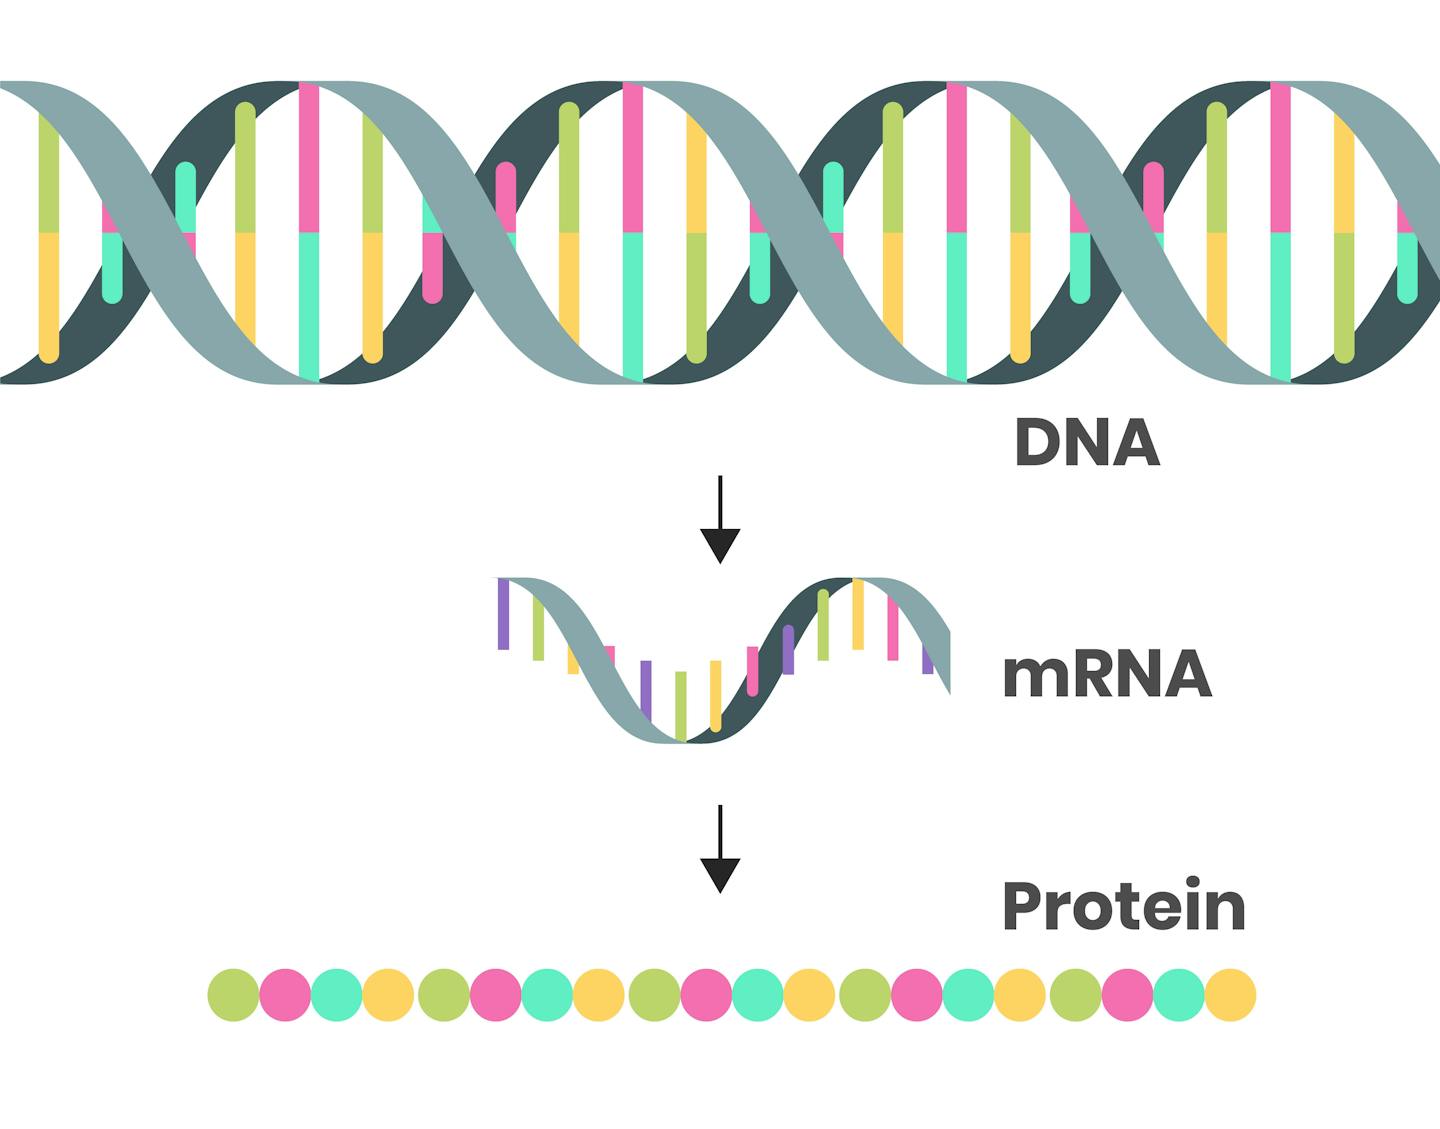 A diagram showing how DNA becomes mRNA which becomes proteins.